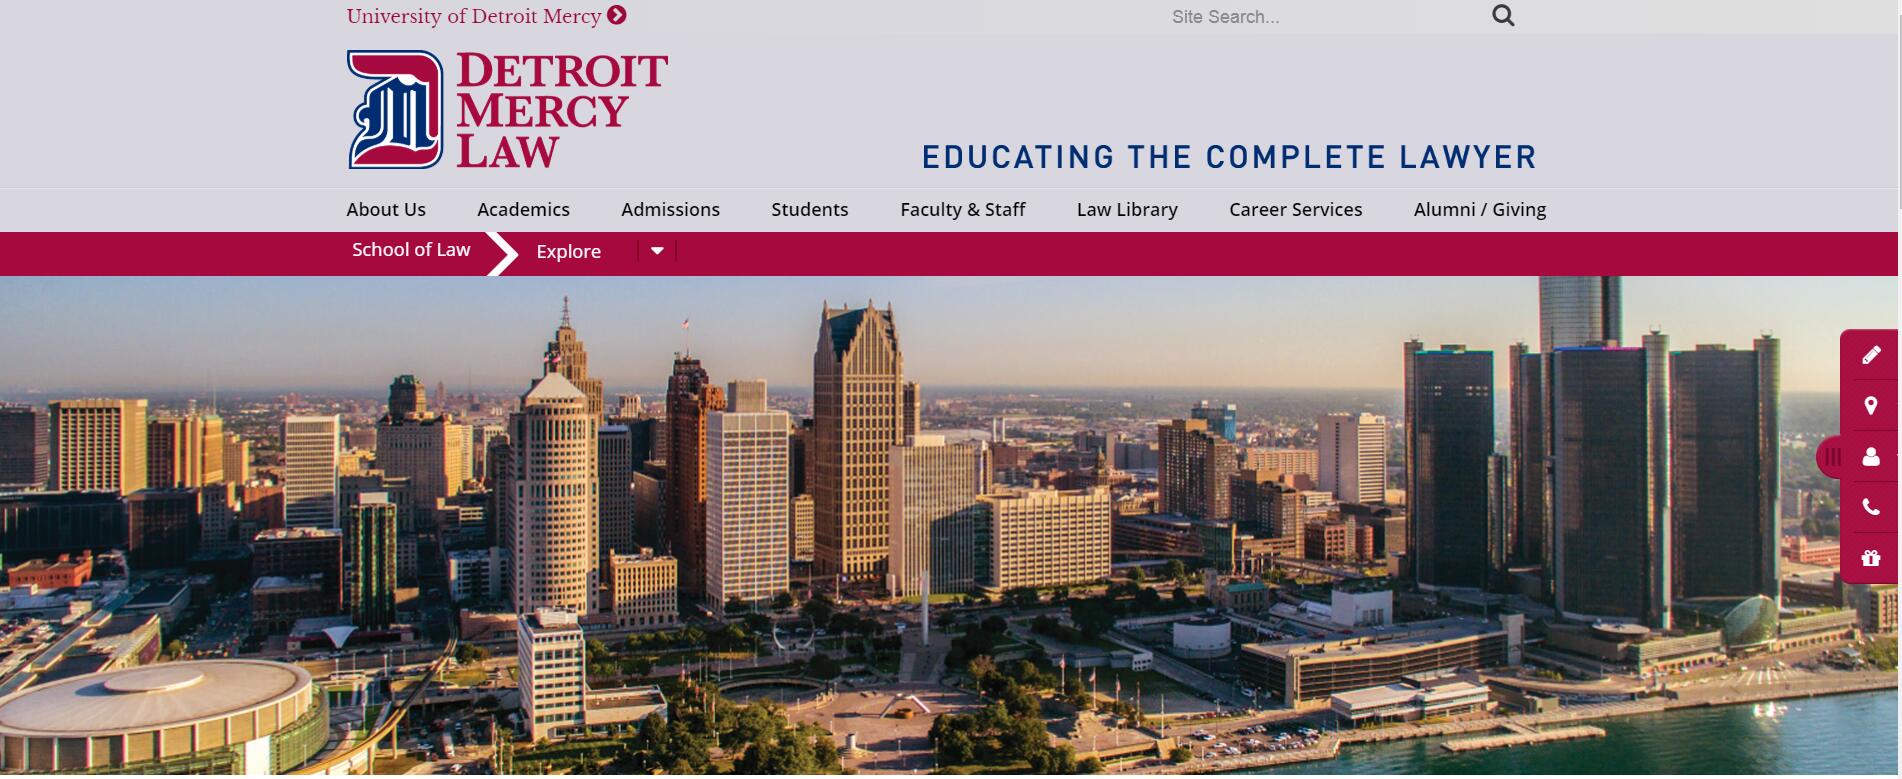 The School of Law at University of Detroit Mercy